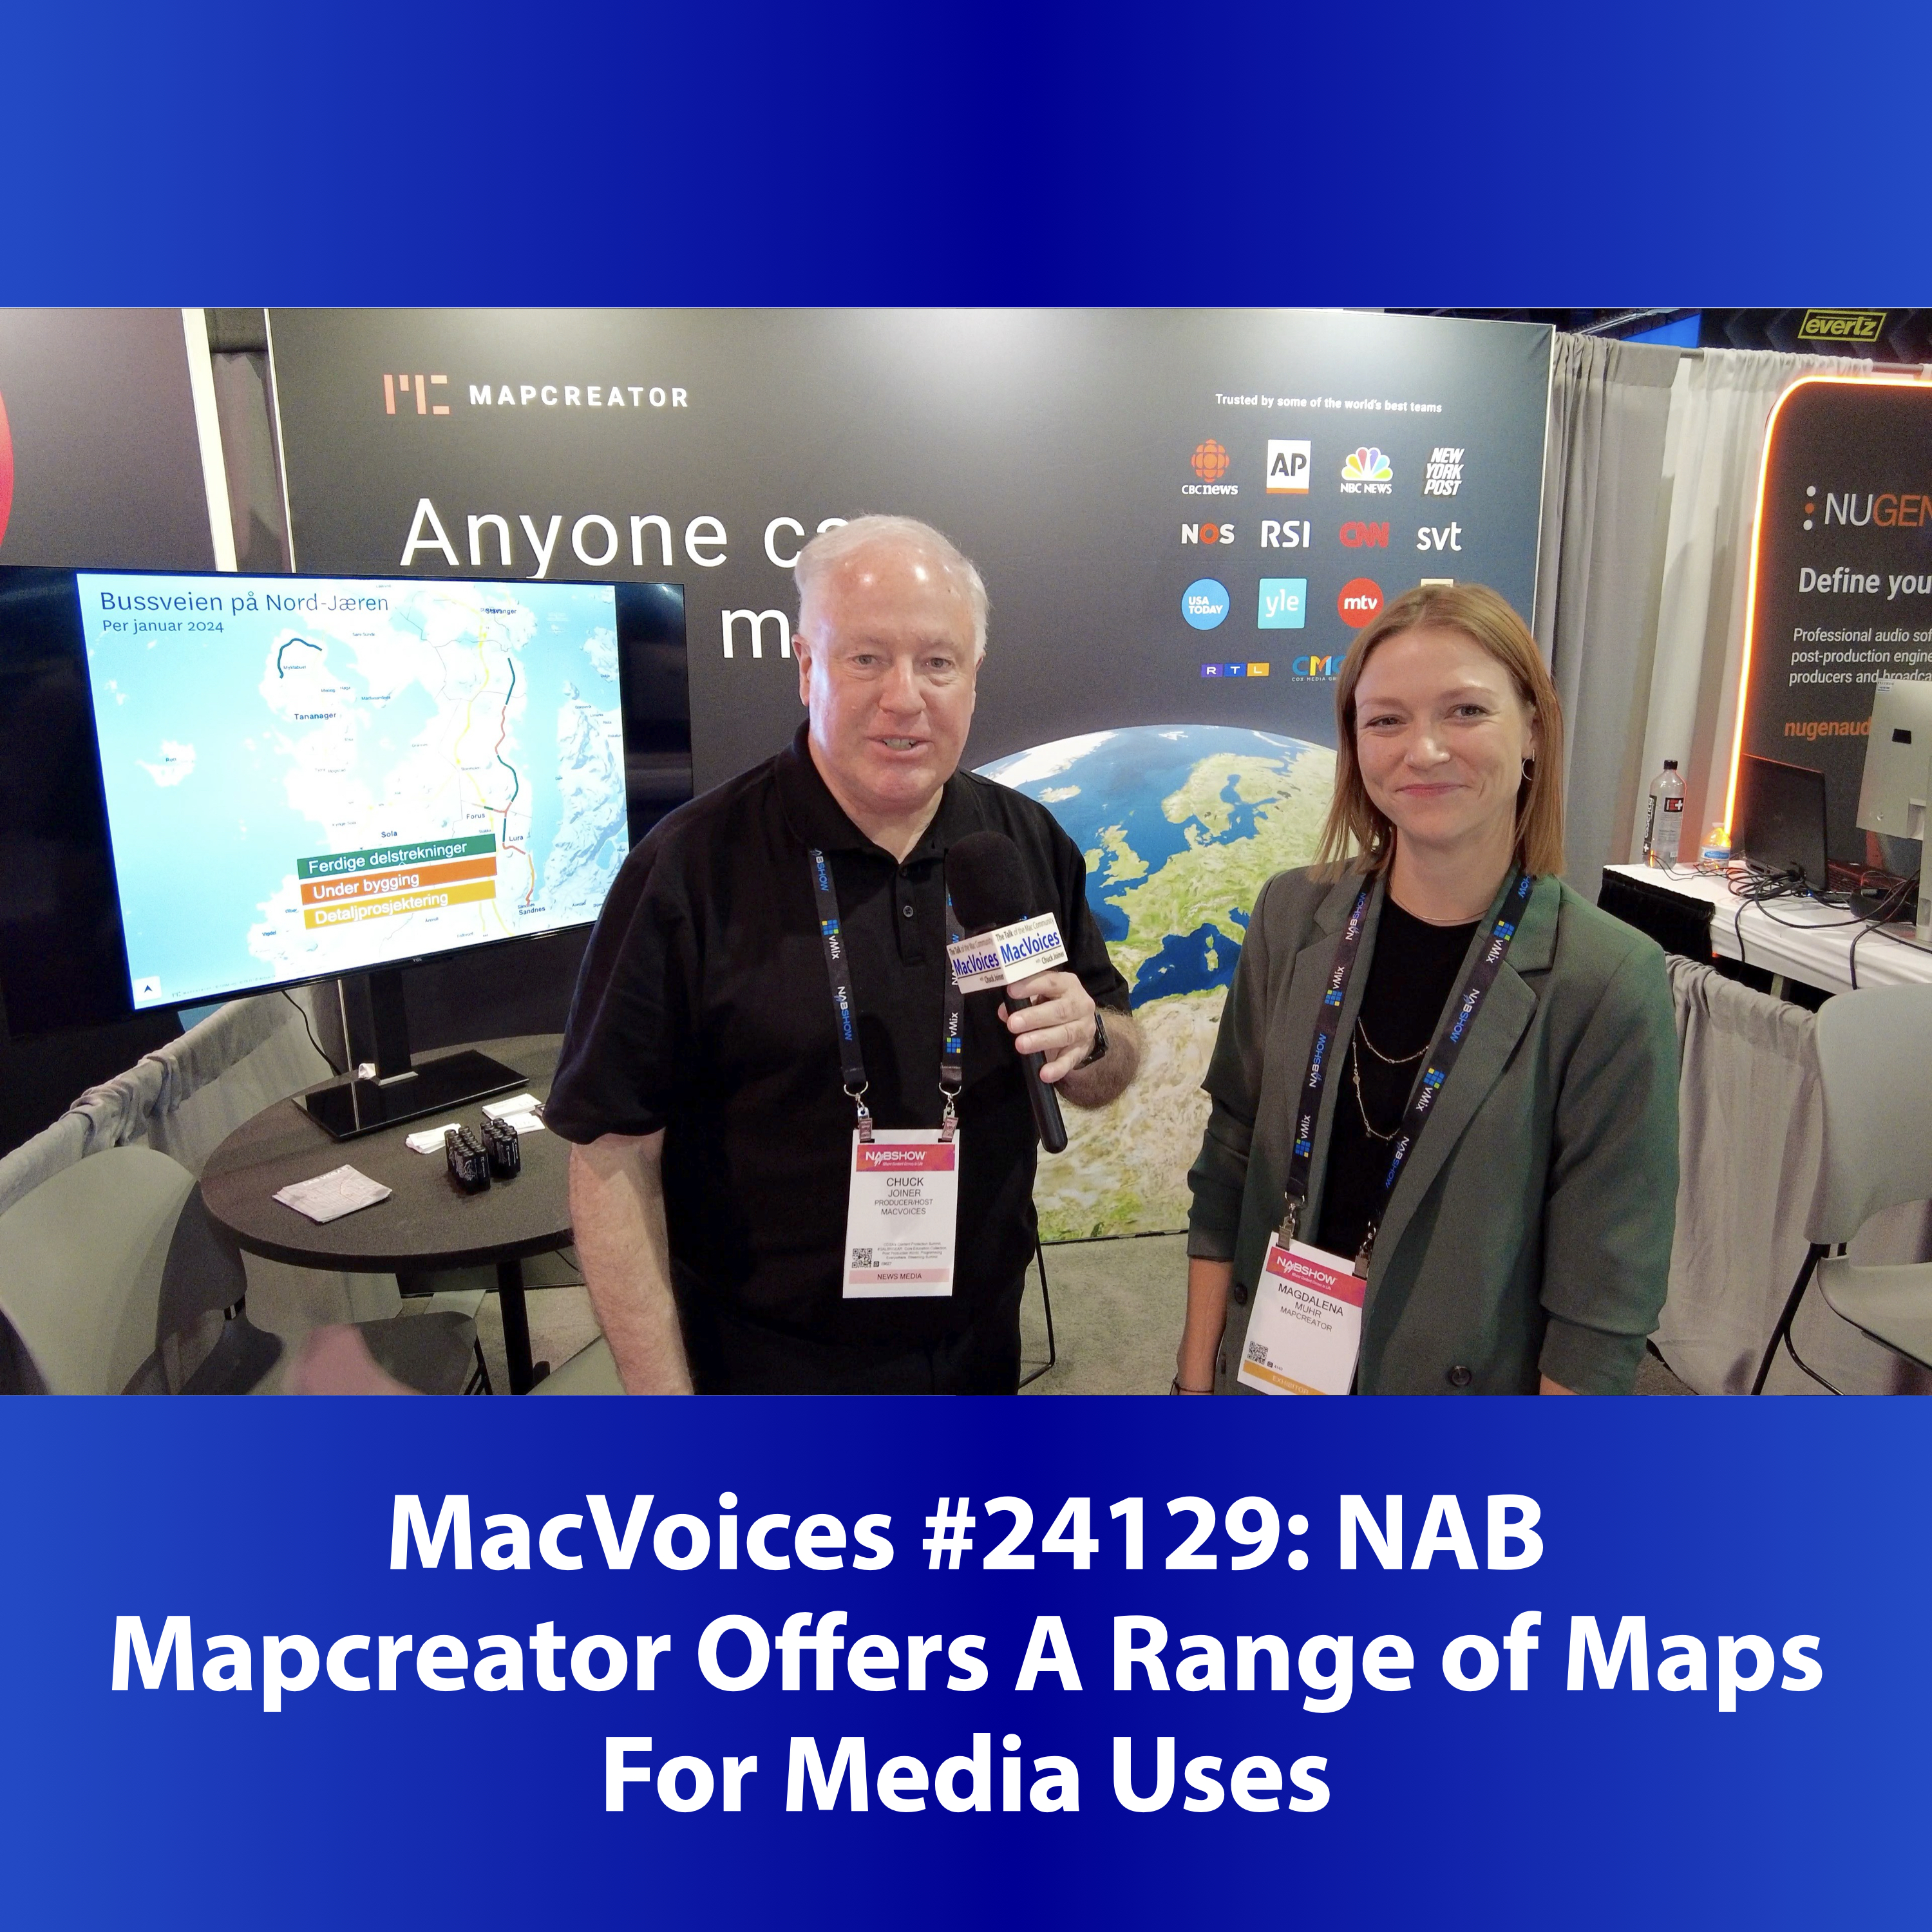 MacVoices #24129: NAB - Mapcreator Offers A Range of Maps For Media Uses